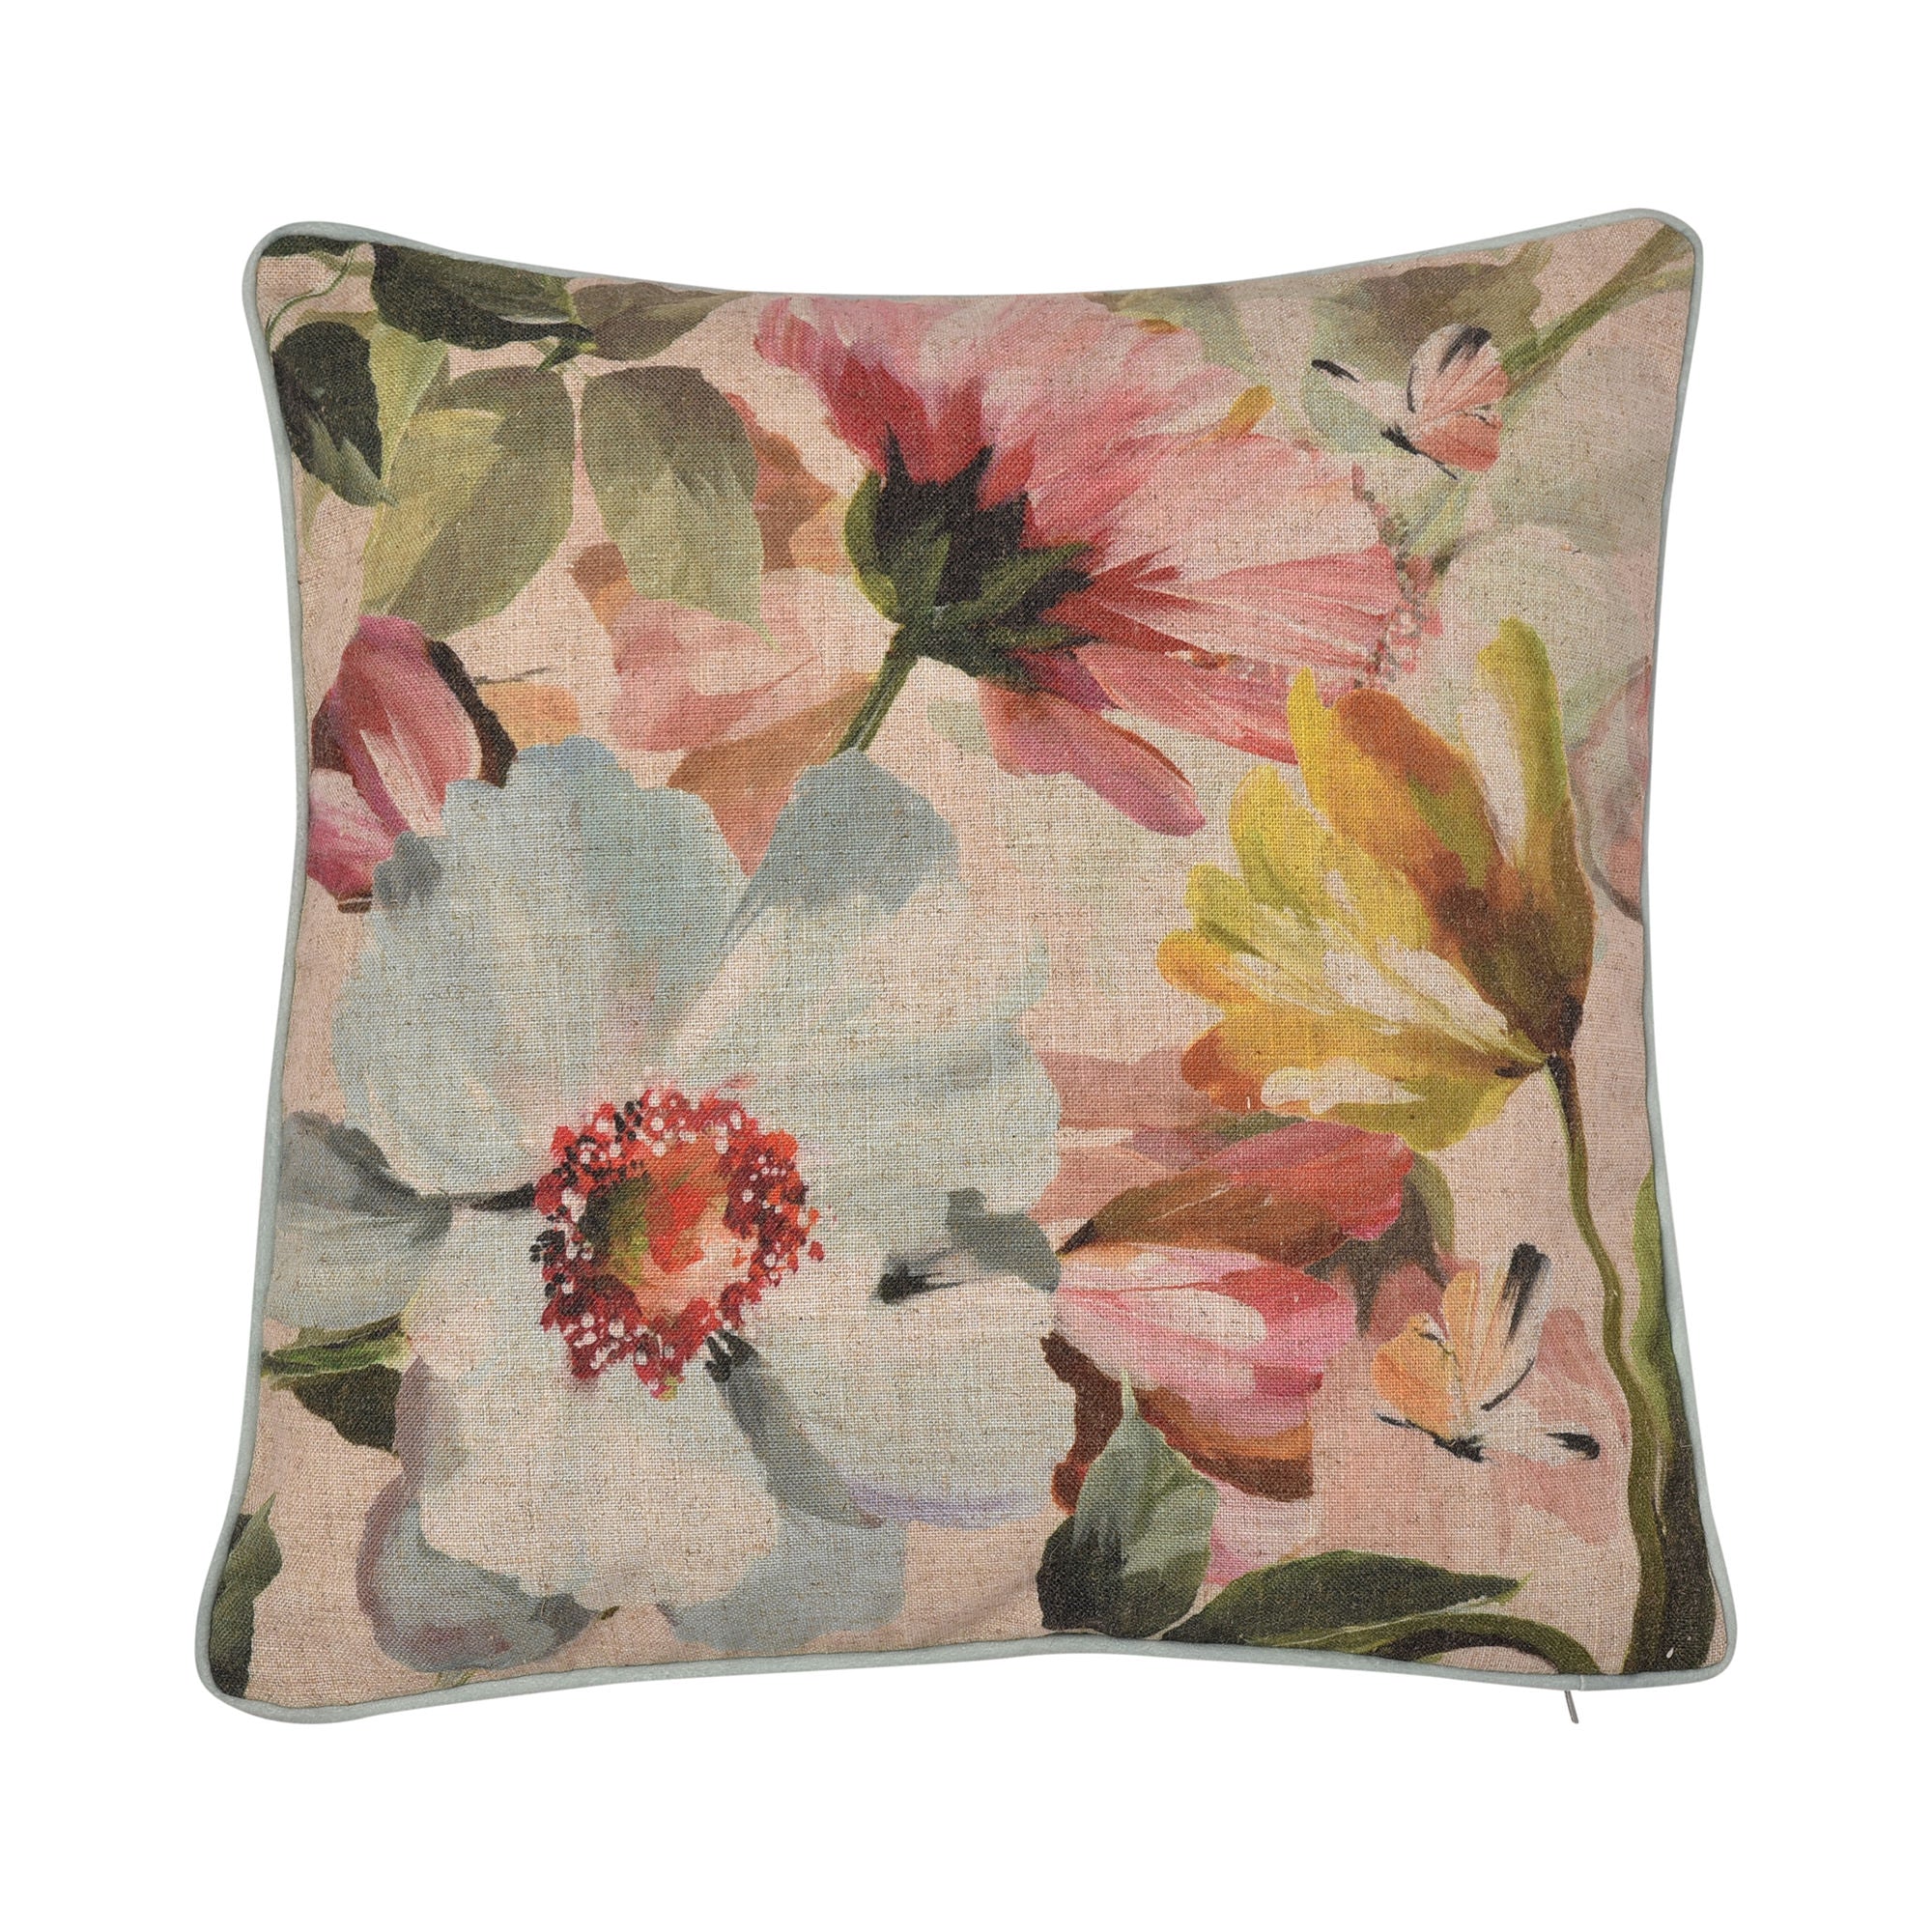 Serenity Cushion by Appletree Heritage in Duck Egg 43 x 43cm - Cushion - Appletree Heritage